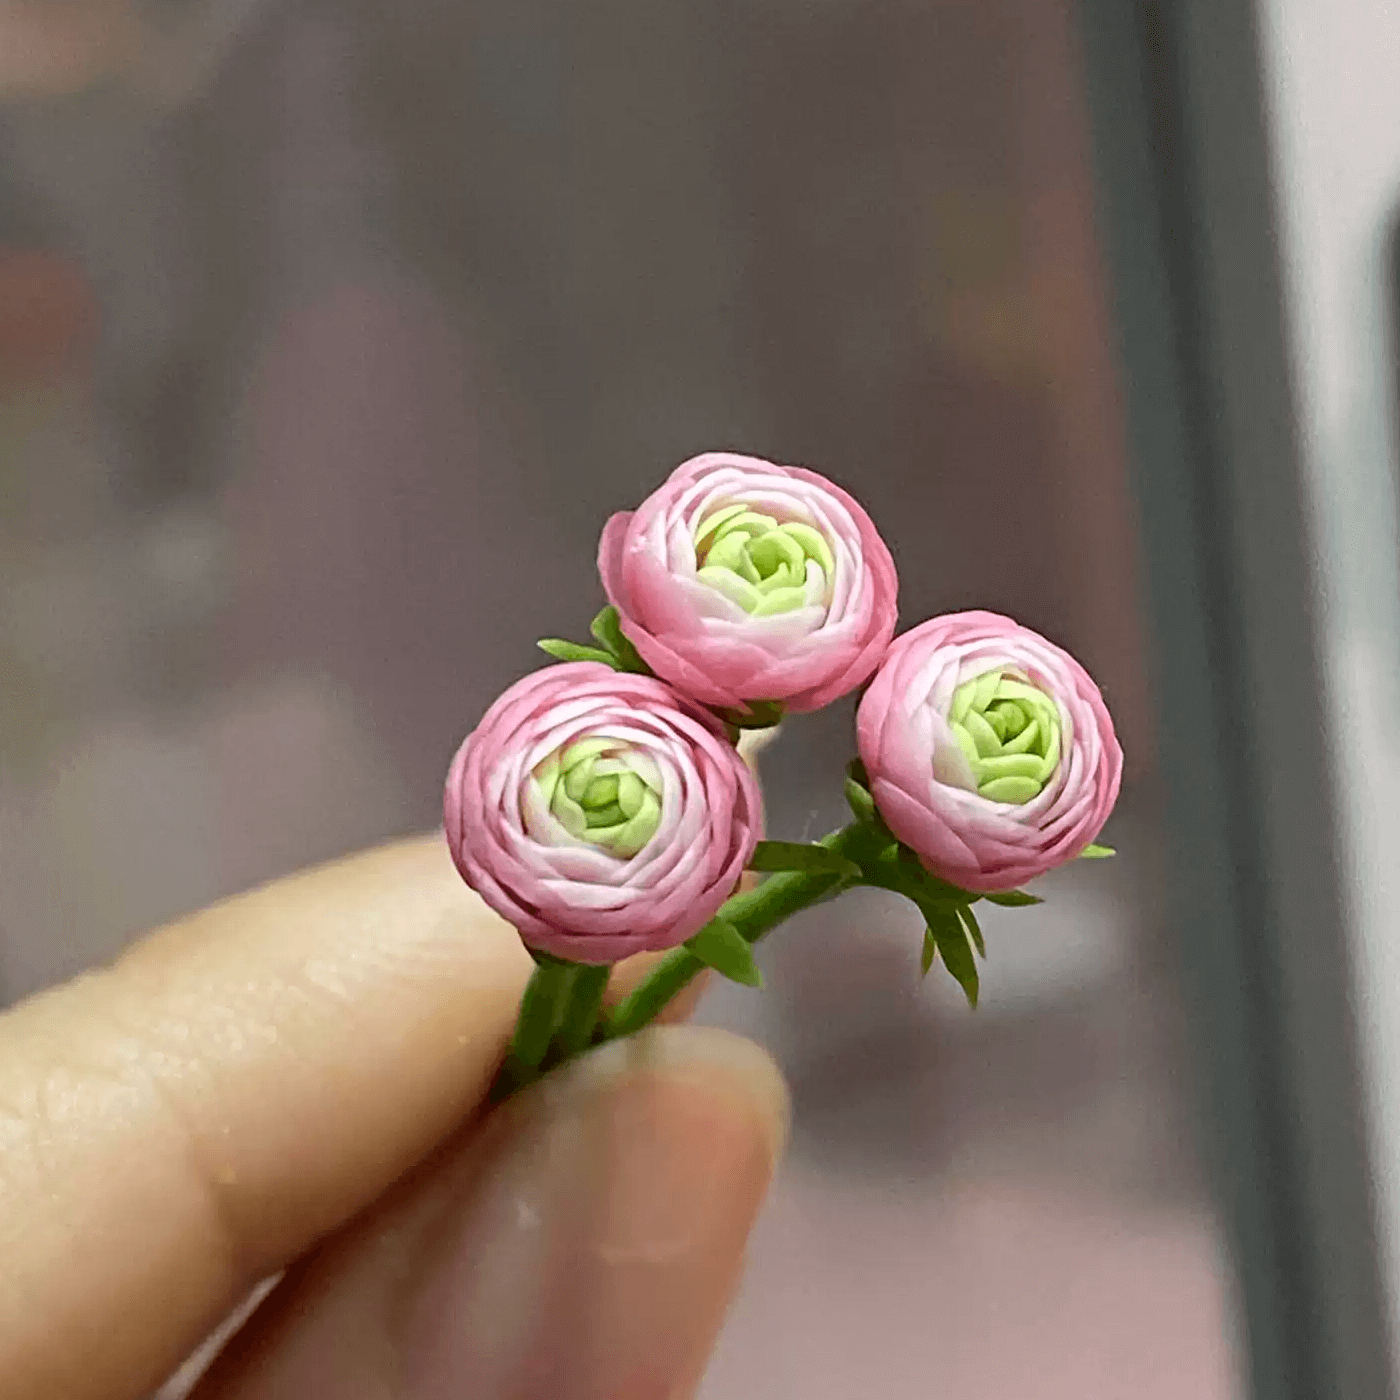 Persian Buttercup (Ranunculus Asiaticus) is a tuberous perennial with long-stalked, deeply lobed leaves. Branched flowering stems bear one to four single, cup-shaped, red, pink, yellow or white flowers with black centres. Miniature for dolls, dollhouses, roomboxes. Suitable for Blythe, Barbie, Paola,and other dolls with a height of 25-40cm (10-15.8 inches).